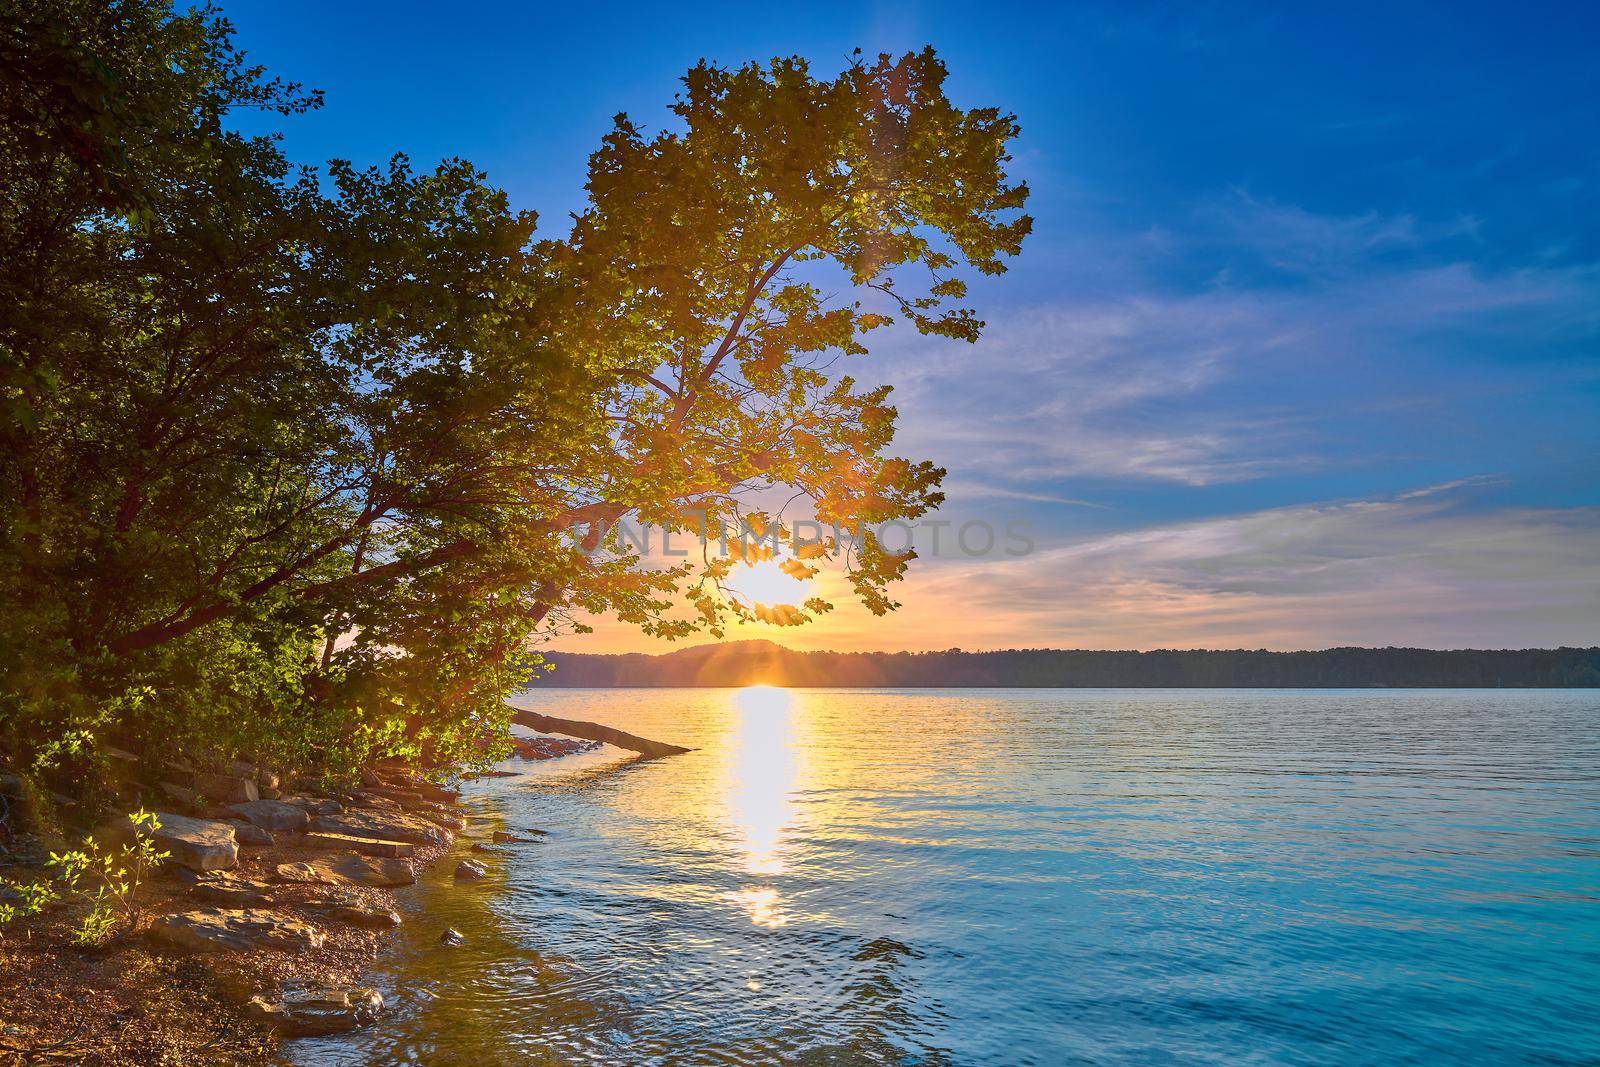 Leaning tree along the shoreline of Cave Run Lake, KY with setting sun. by patrickstock